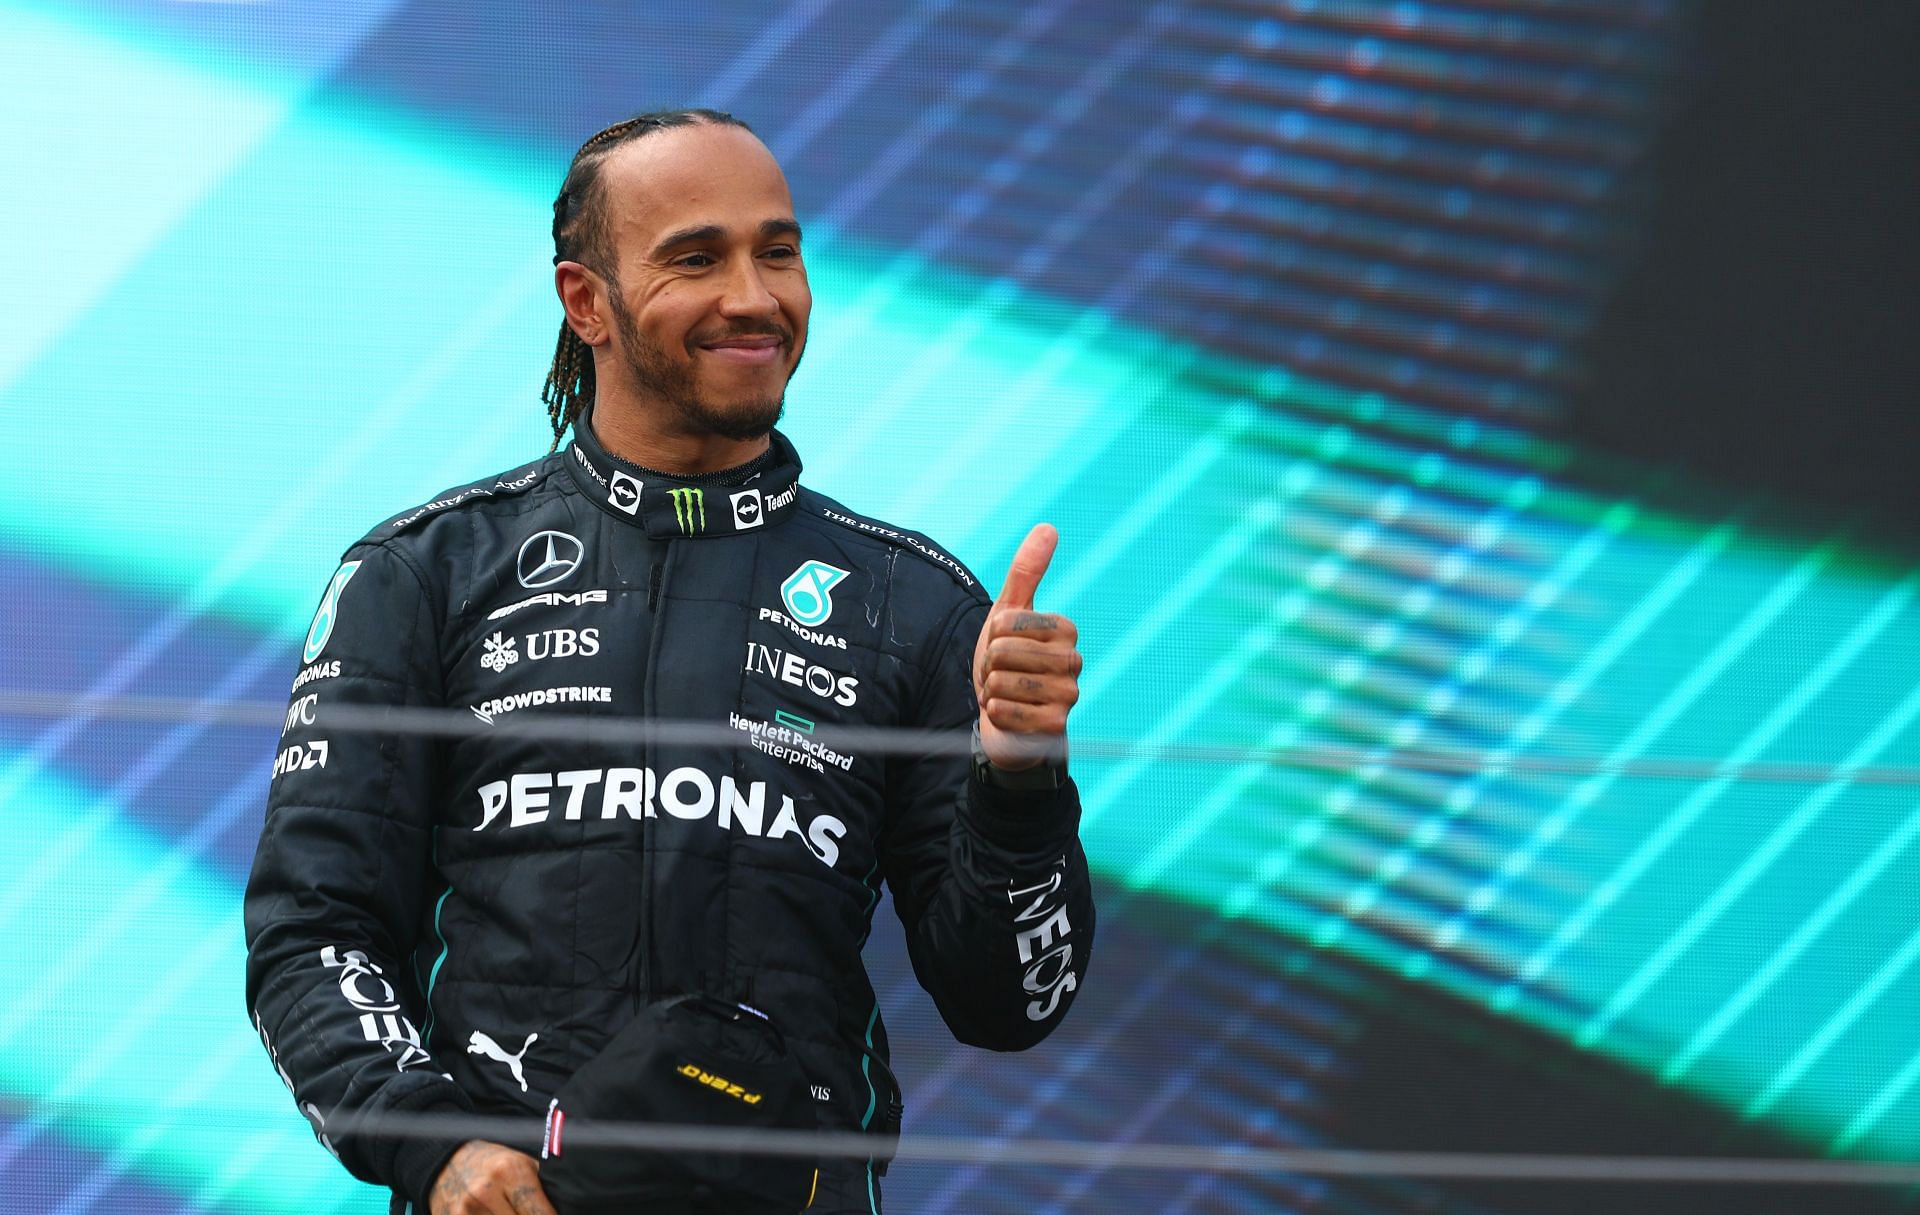 Lewis Hamilton was critical of the crowd&#039;s behavior after it cheered his crash during qualifying for 2022 F1 Austrian GP